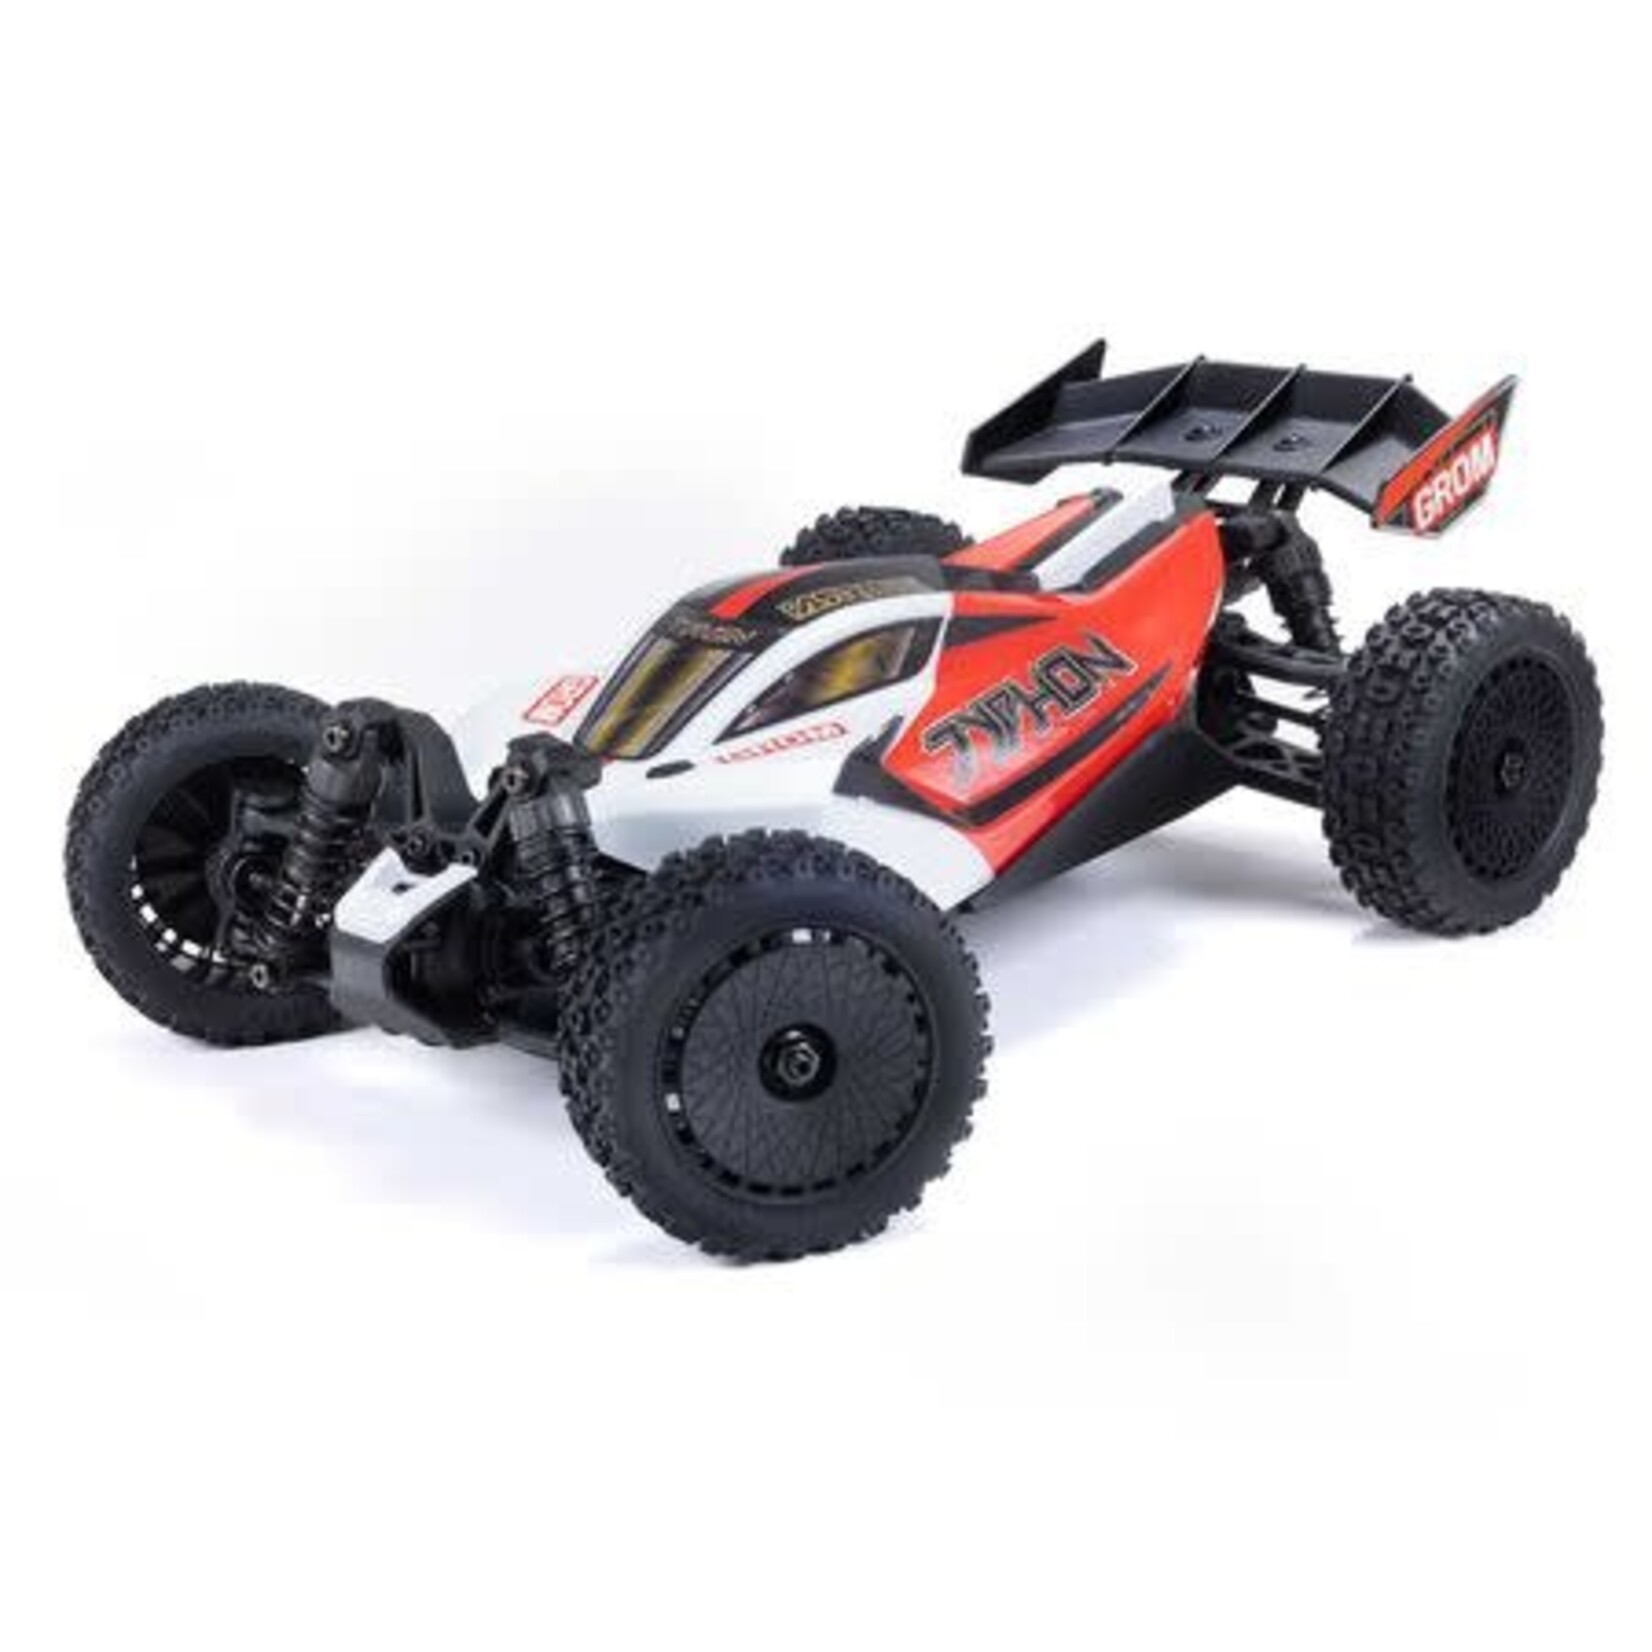 Arrma 1/18 TYPHON GROM 4x4 SMART Small Scale Buggy